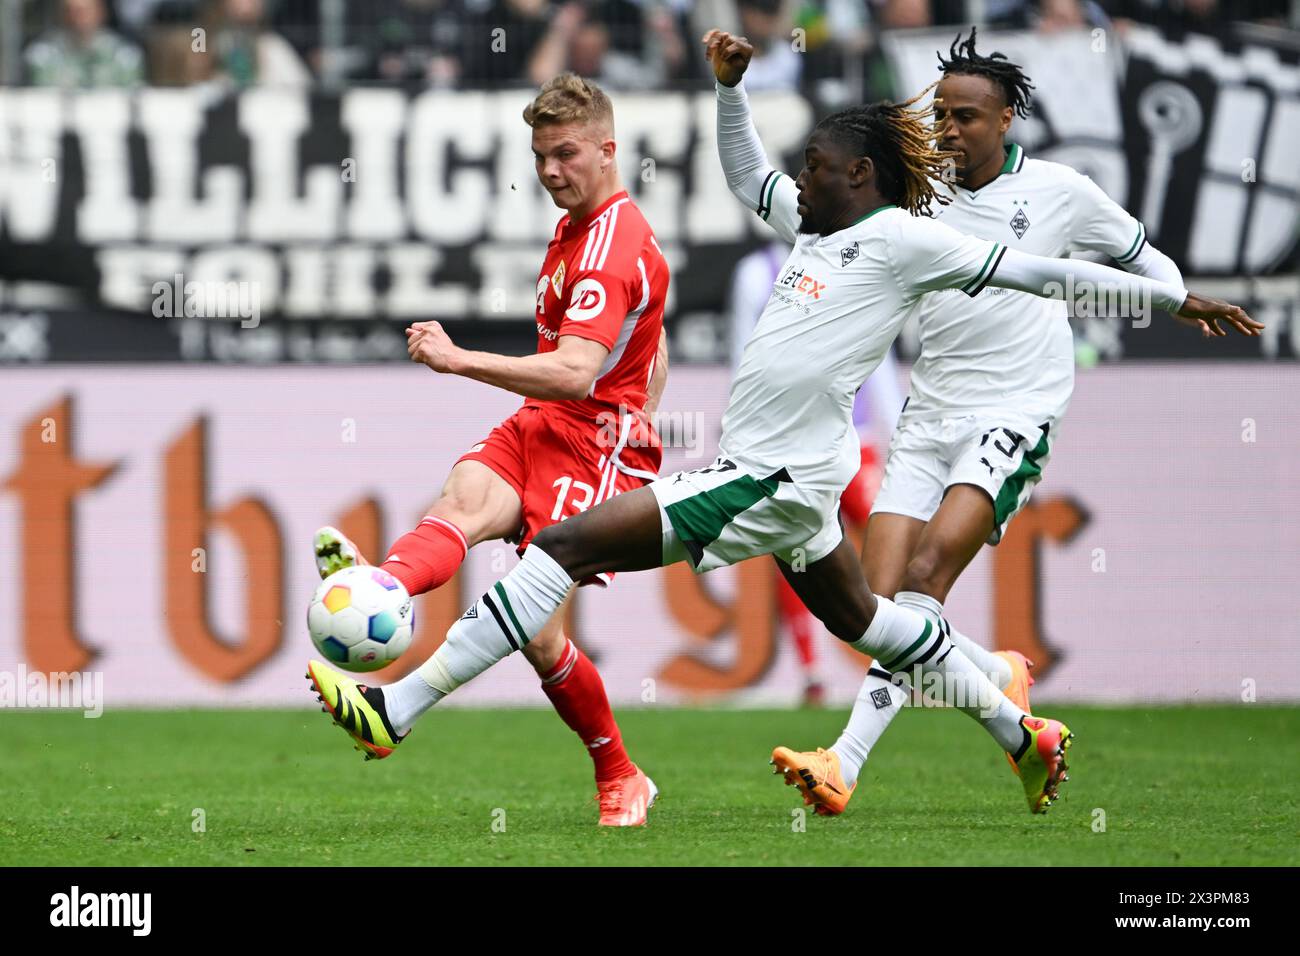 28 April 2024, North Rhine-Westphalia, Mönchengladbach: Soccer: Bundesliga, Borussia Mönchengladbach - 1. FC Union Berlin, Matchday 31, Stadion im Borussia-Park. Mönchengladbach's Manu Kone (r) and Berlin's Andras Schäfer fight for the ball. Photo: Federico Gambarini/dpa - IMPORTANT NOTE: In accordance with the regulations of the DFL German Football League and the DFB German Football Association, it is prohibited to utilize or have utilized photographs taken in the stadium and/or of the match in the form of sequential images and/or video-like photo series. Stock Photo